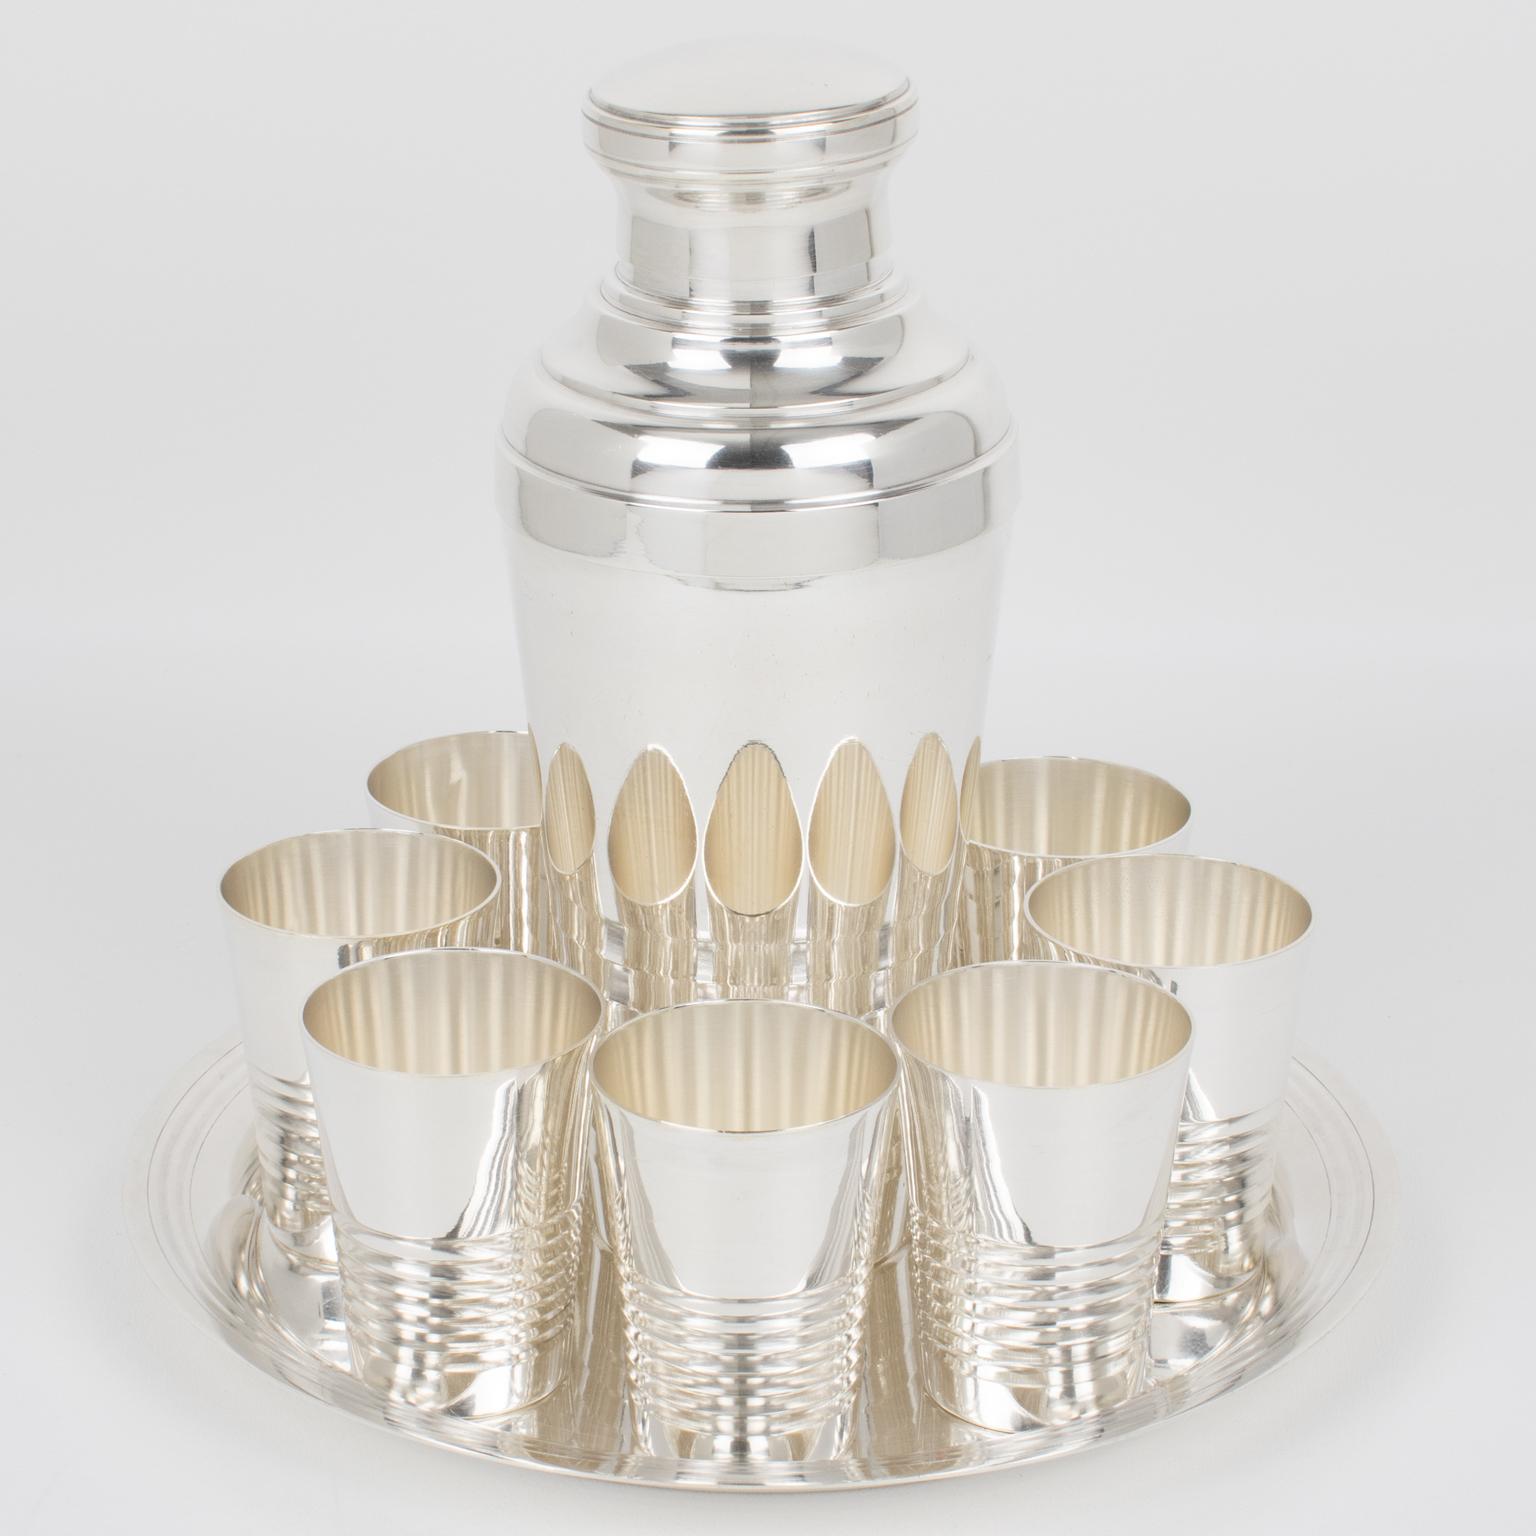 Silversmith Roux-Marquiand, Paris, designed this elegant Art Deco silver plate barware serving set in the 1940s. The three-sectioned designed cylindrical cocktail or Martini shaker has a removable cap and strainer. The set is complemented with eight